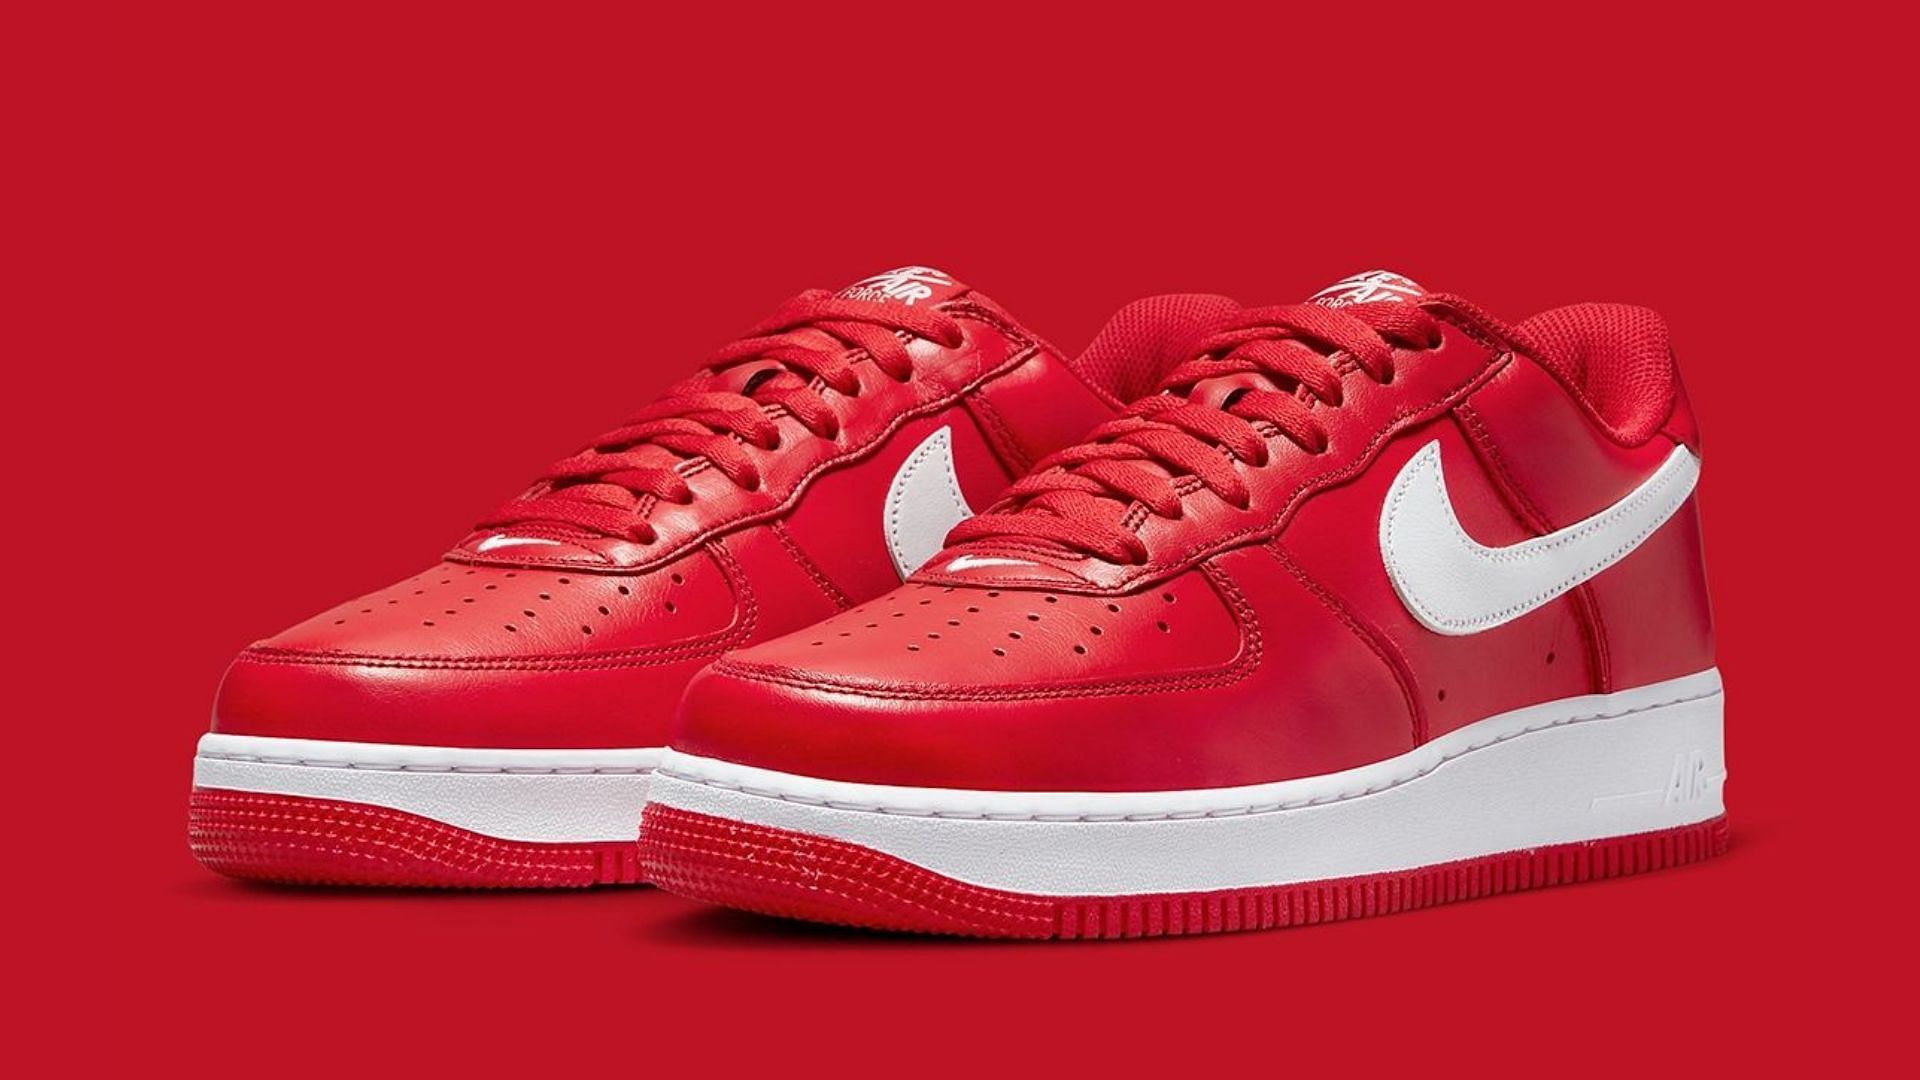 Nike Air Force 1 Low University Red shoes (Image via Nike)